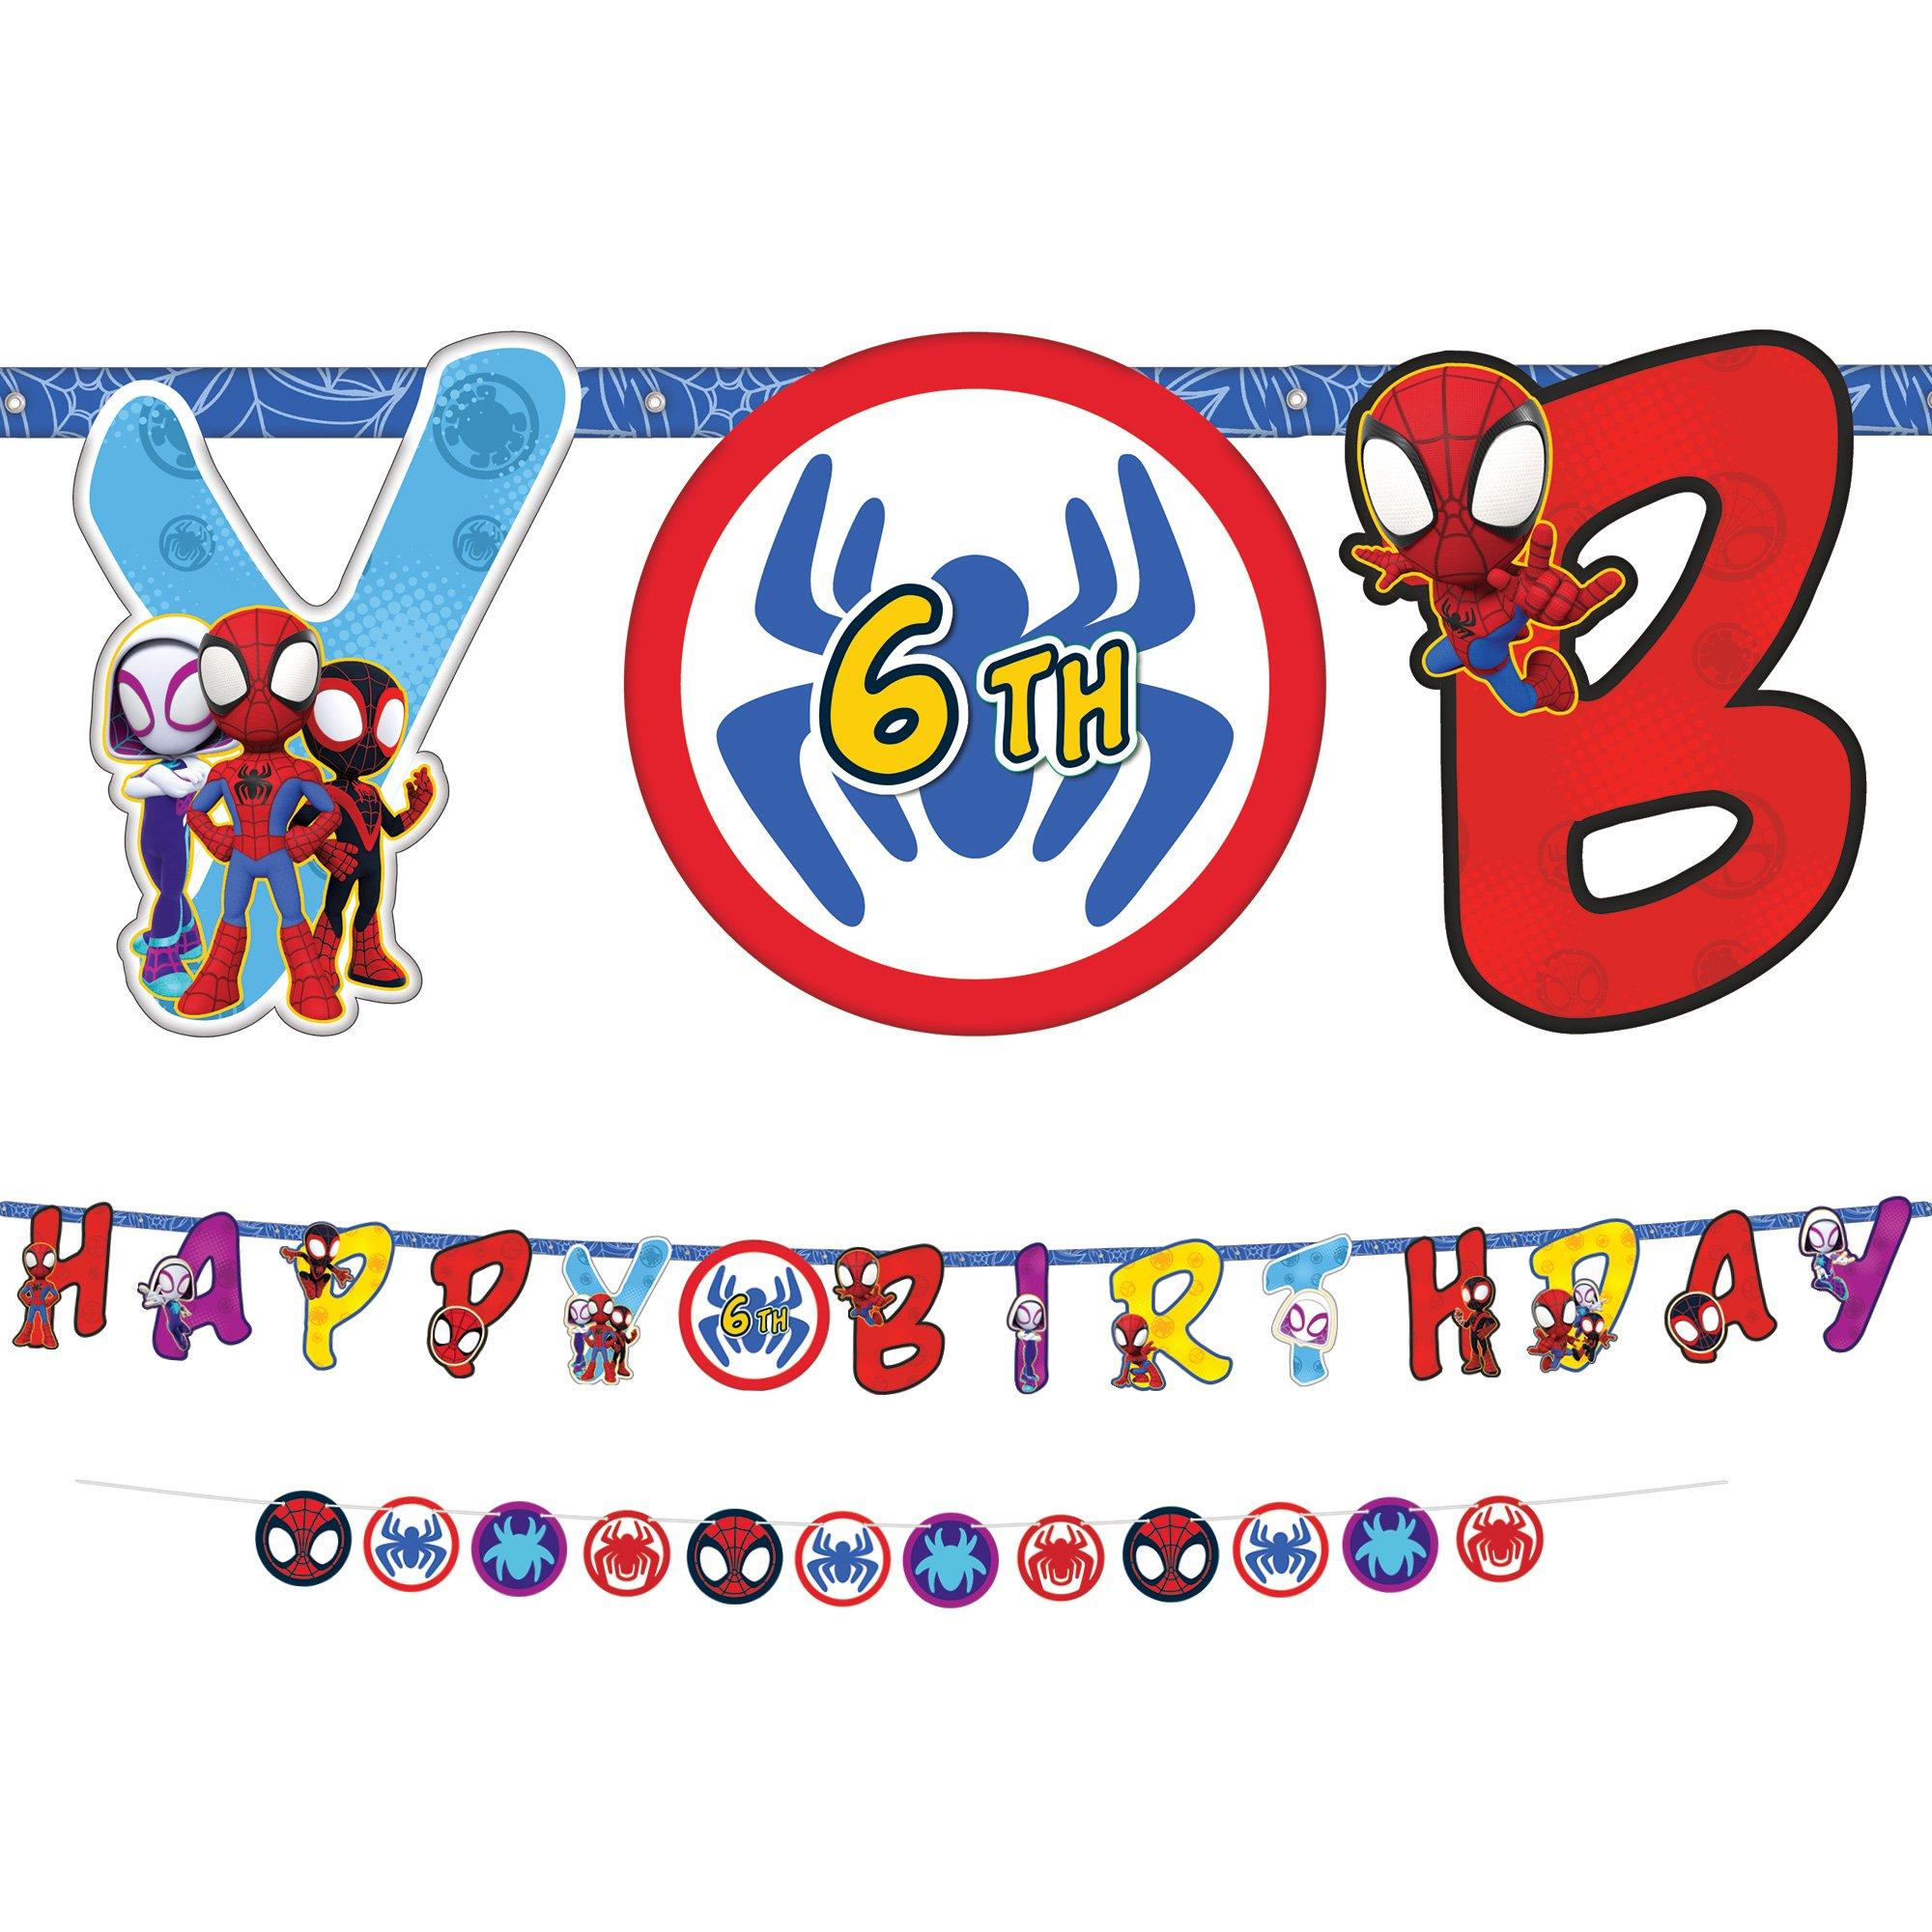 Spidey and his Amazing Friends: Group Life-Size Foam Core Cutout - Off   Spiderman birthday party, Spiderman birthday, Pj masks birthday party boys